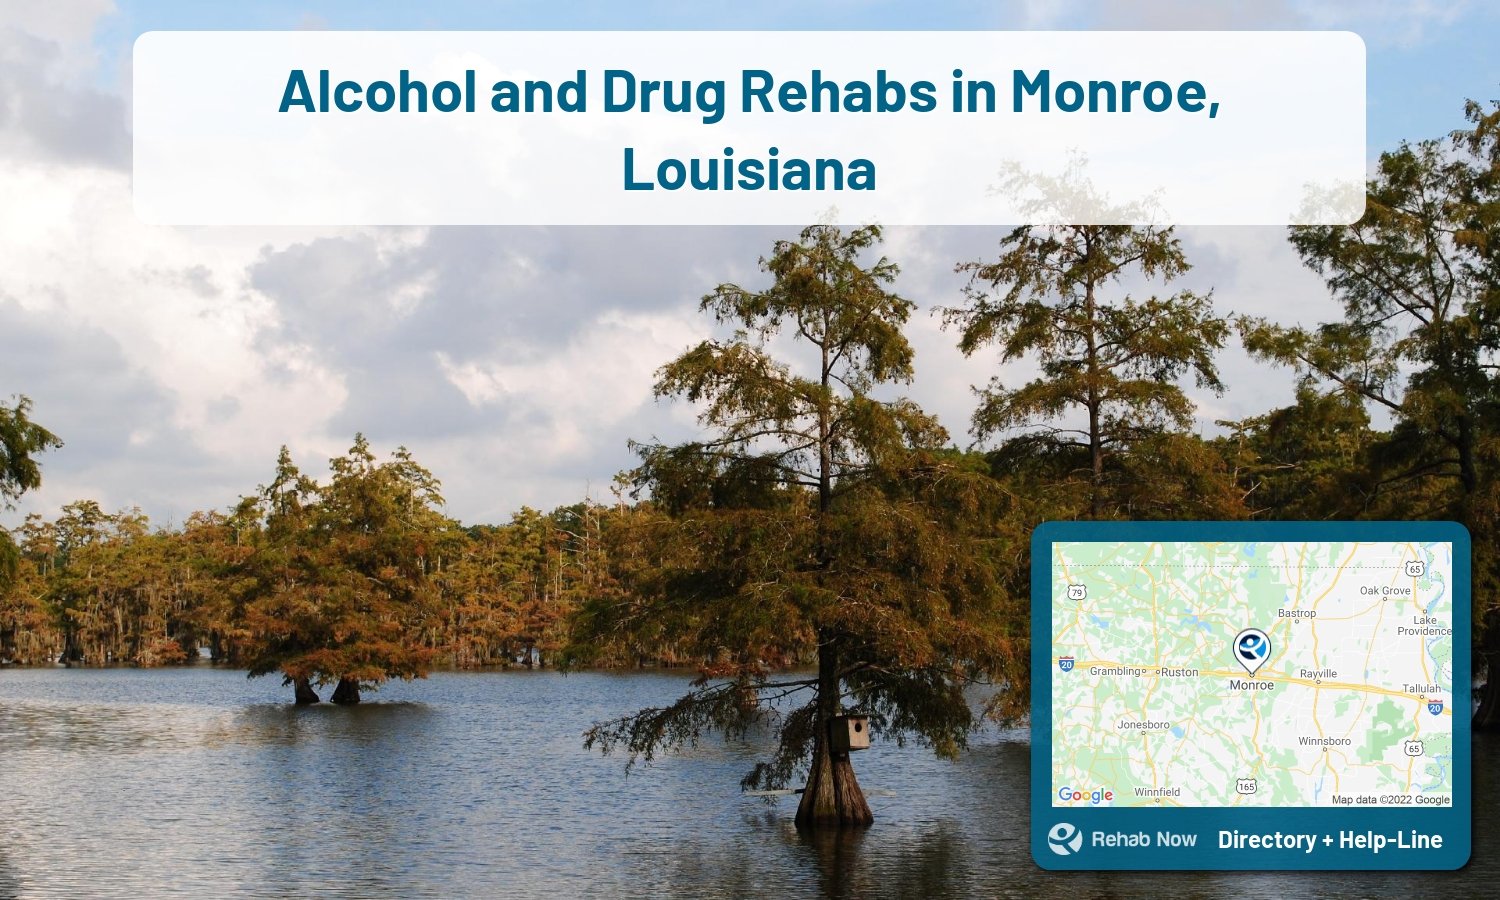 Monroe, LA Treatment Centers. Find drug rehab in Monroe, Louisiana, or detox and treatment programs. Get the right help now!